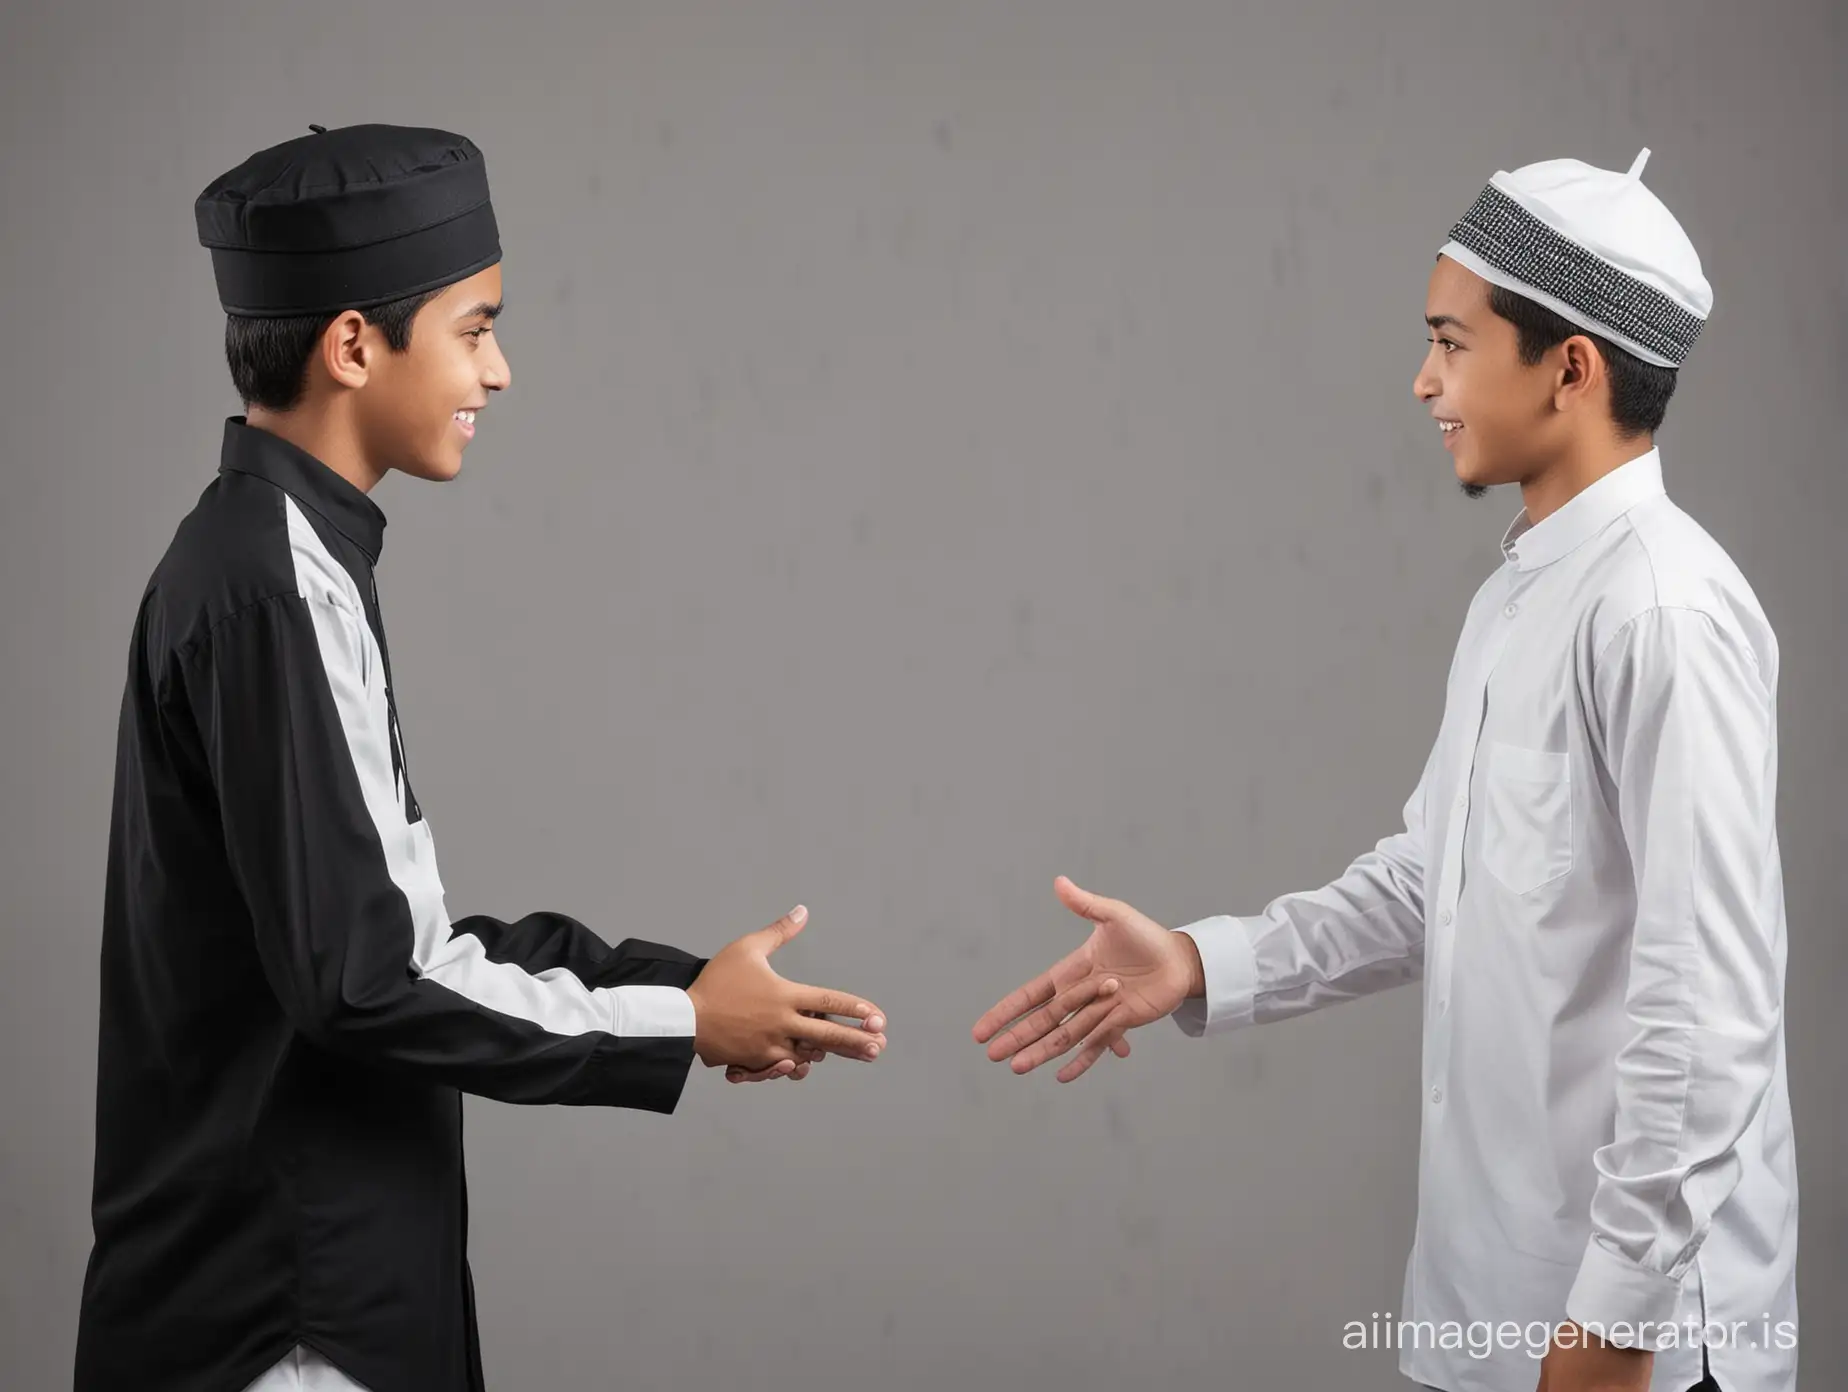 Two Muslim teenagers boys wearing black and white caps shook hands with each other as a sign of forgiving each other.